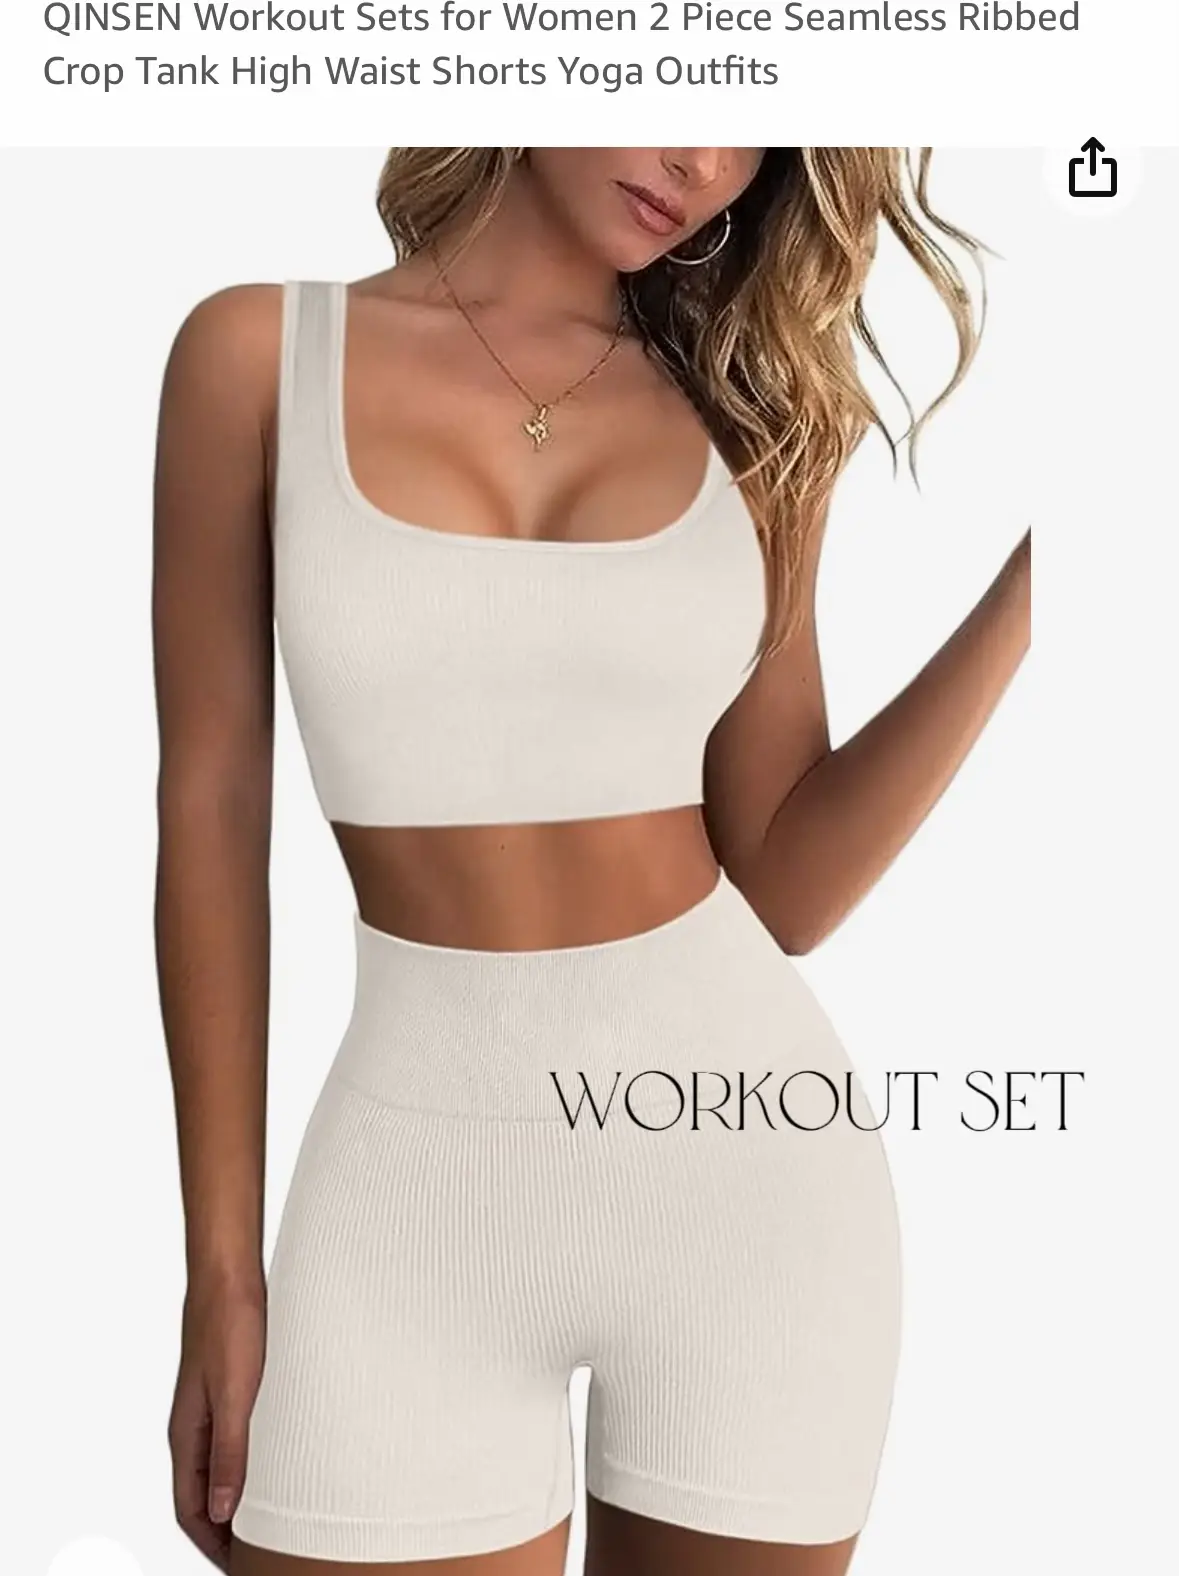 Buy QINSEN Yoga Outfit for Women Seamless 2 Piece Winter Workout Crop Tops  Tie Front High Waist Leggings Sets Beige S at